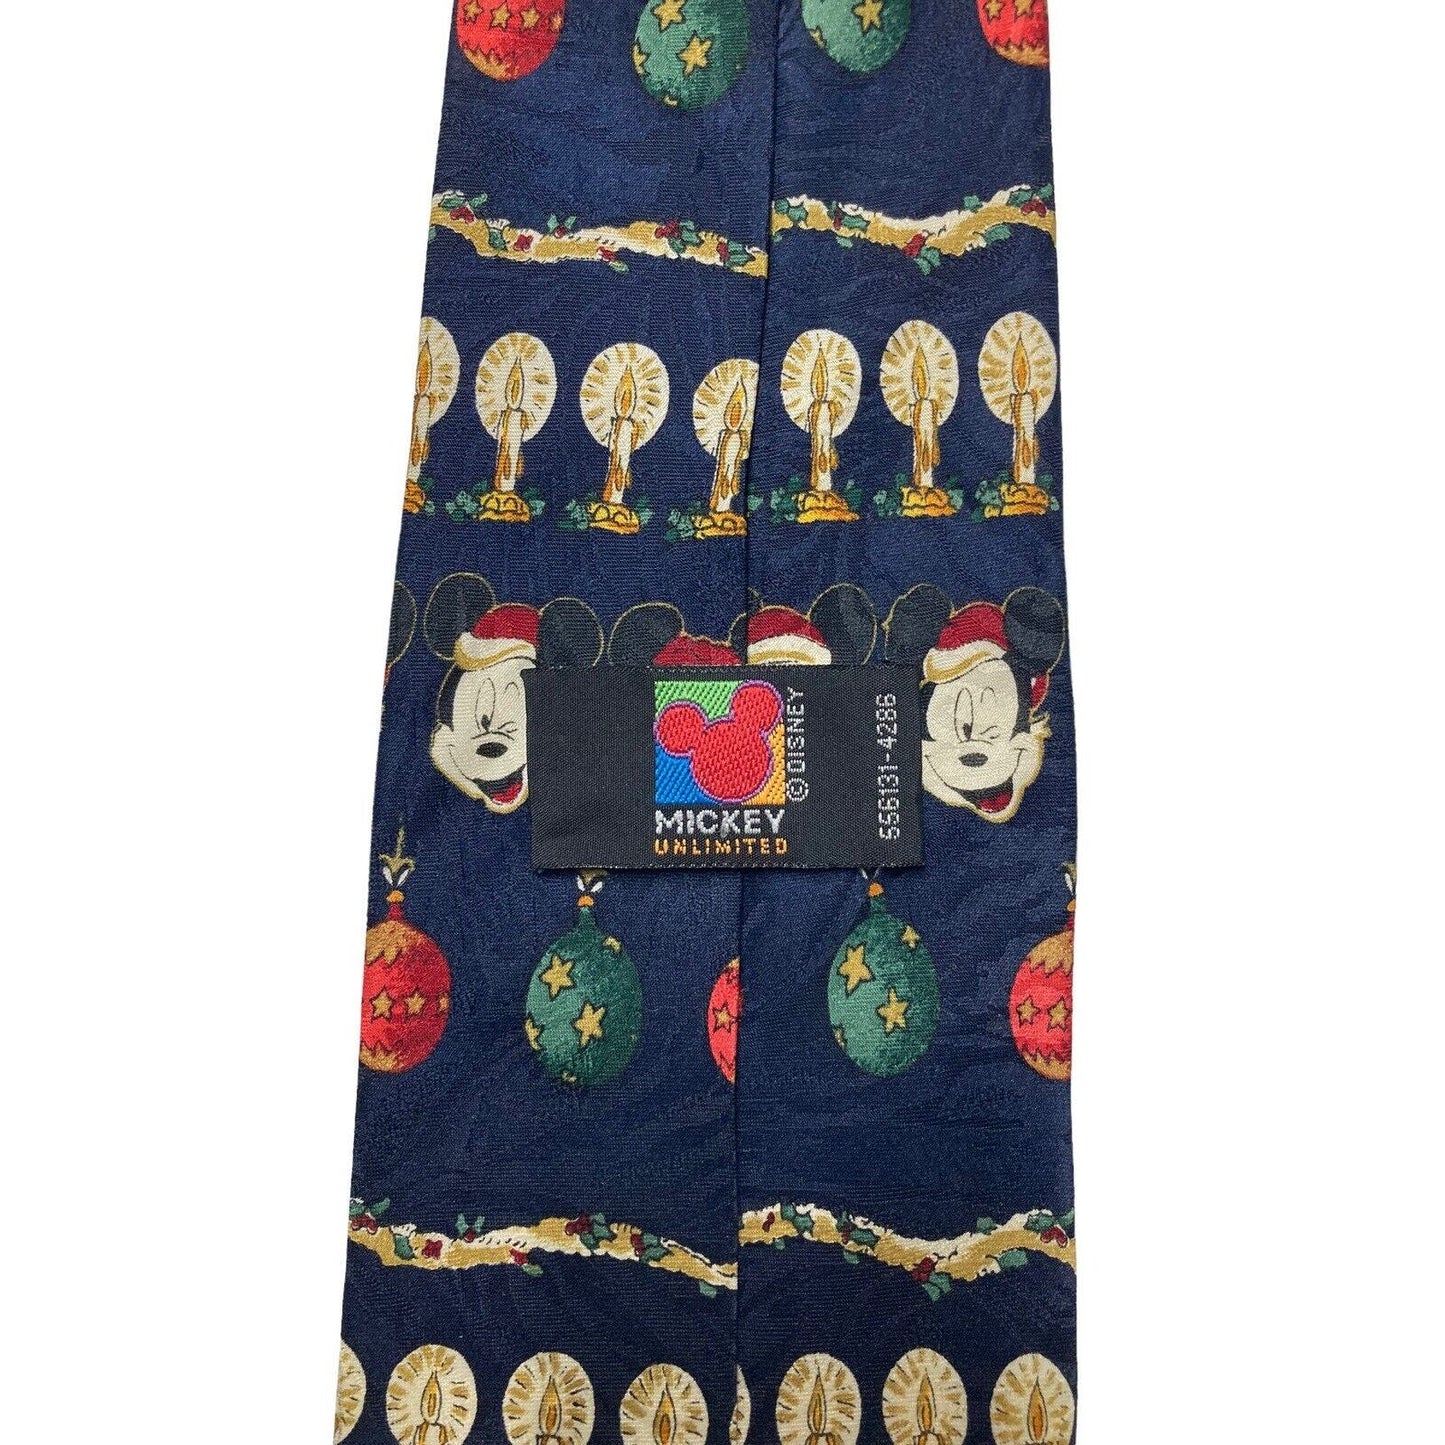 Disney Mickey Unlimited Mickey Mouse Christmas Ornaments Candles Novelty Necktie